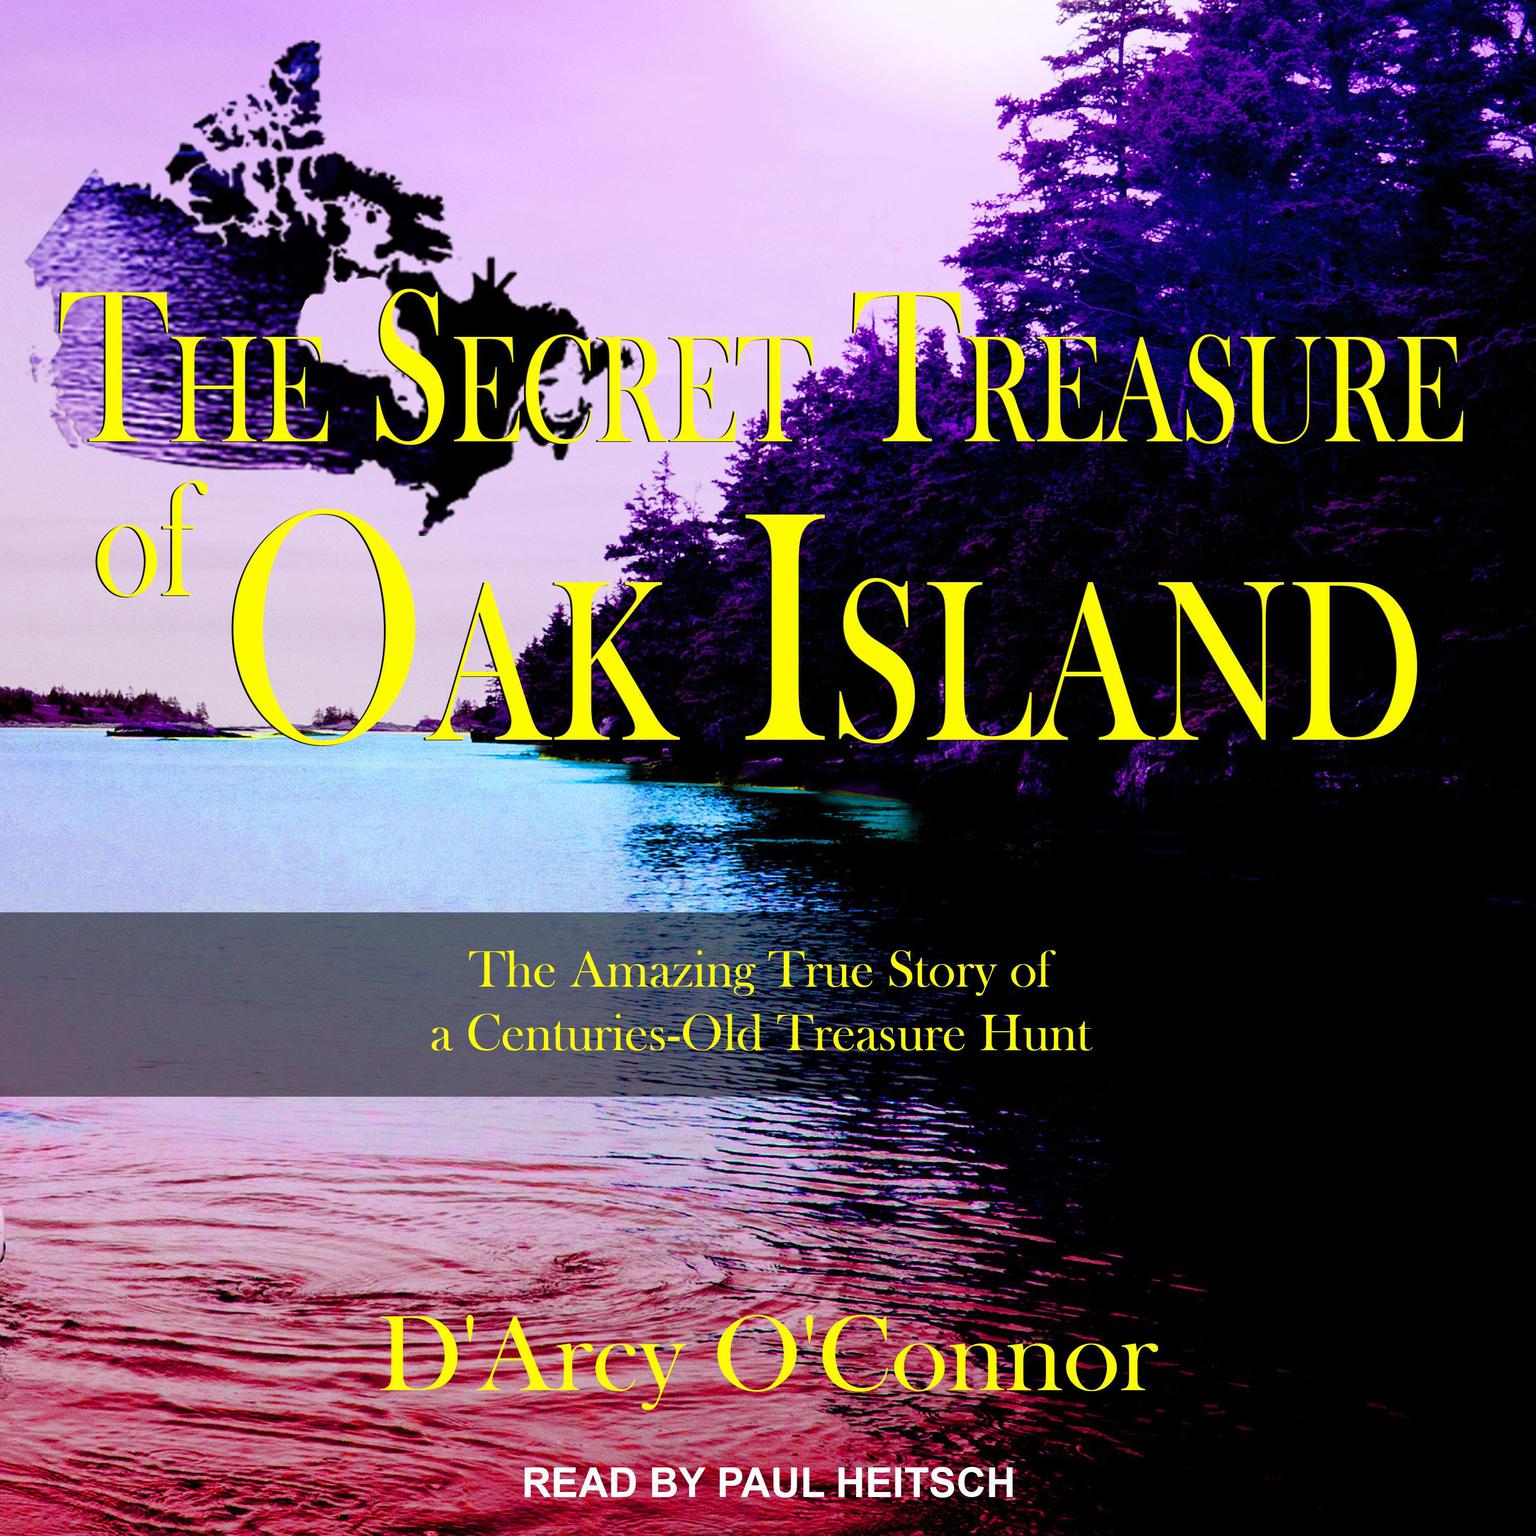 Secret Treasure of Oak Island: The Amazing True Story of a Centuries-Old Treasure Hunt Audiobook, by D'Arcy O'Connor